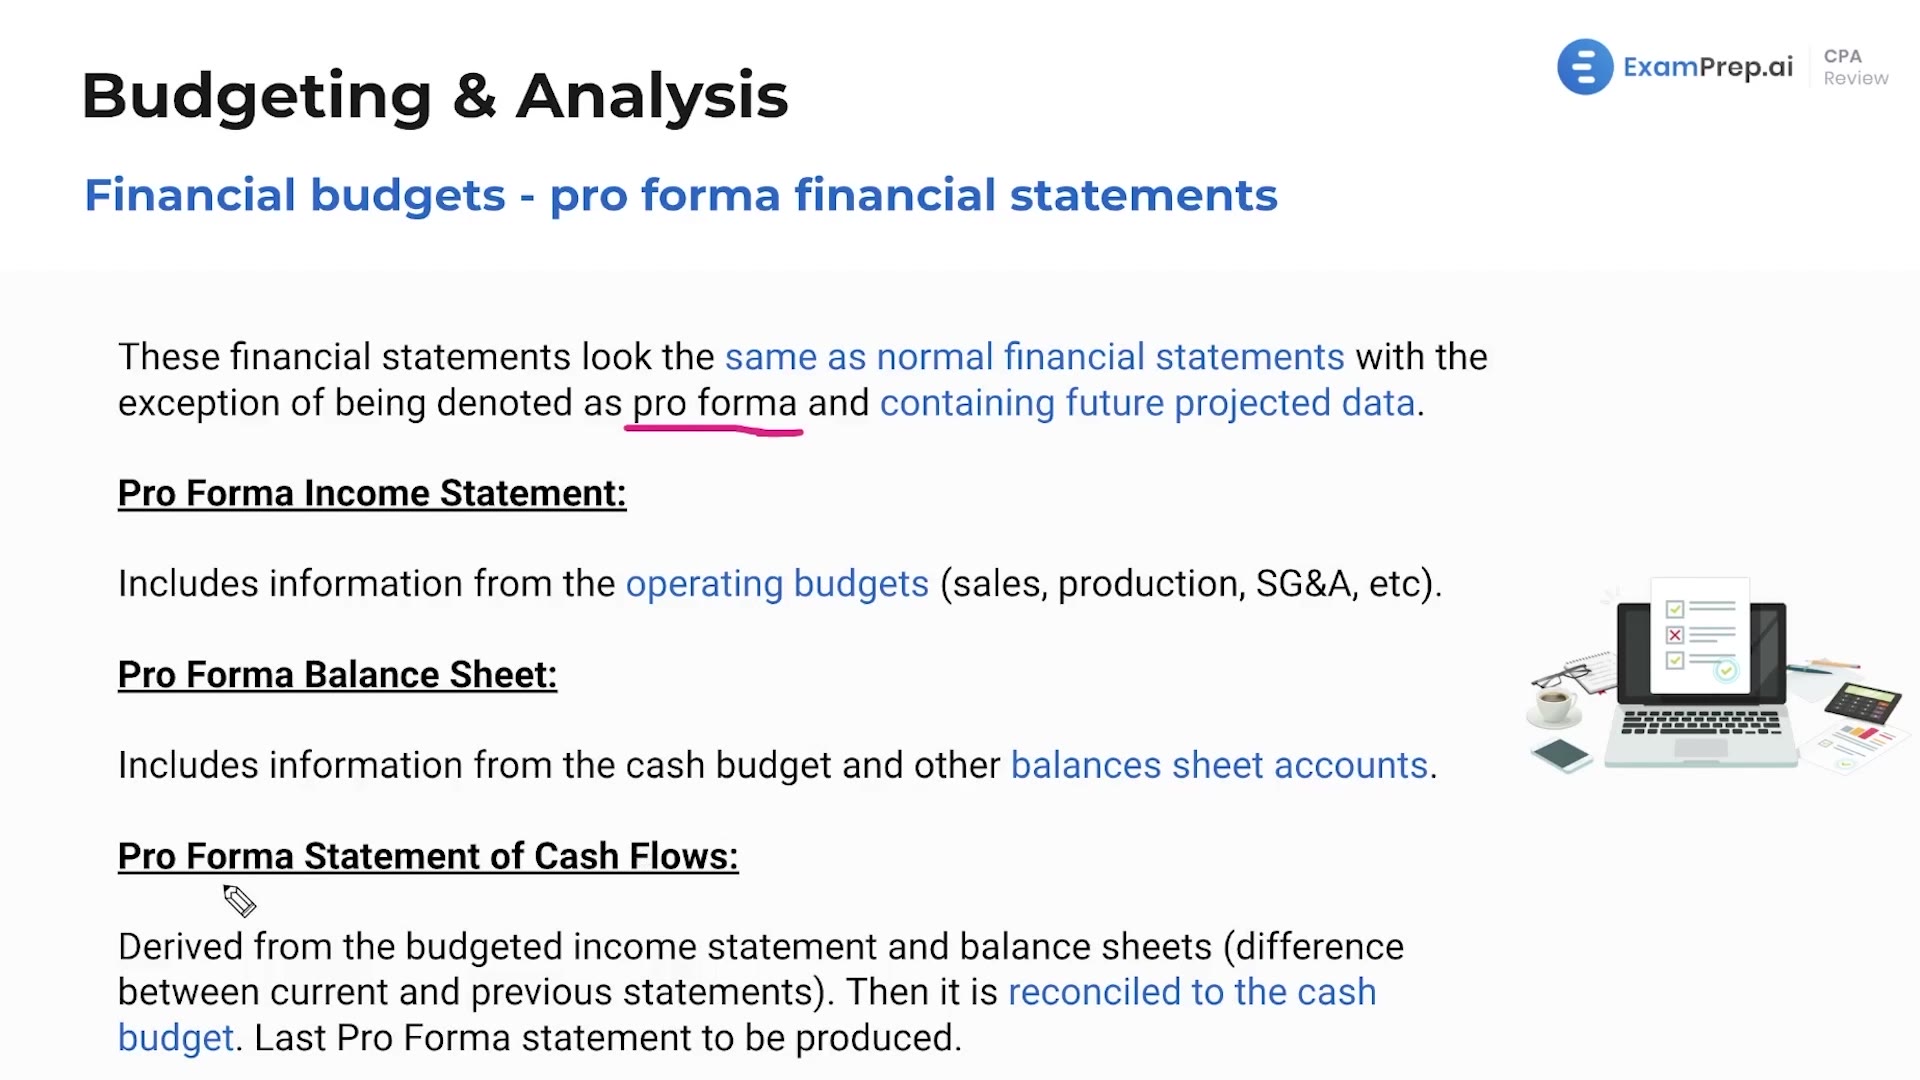 Pro Forma Financial Statements lesson thumbnail